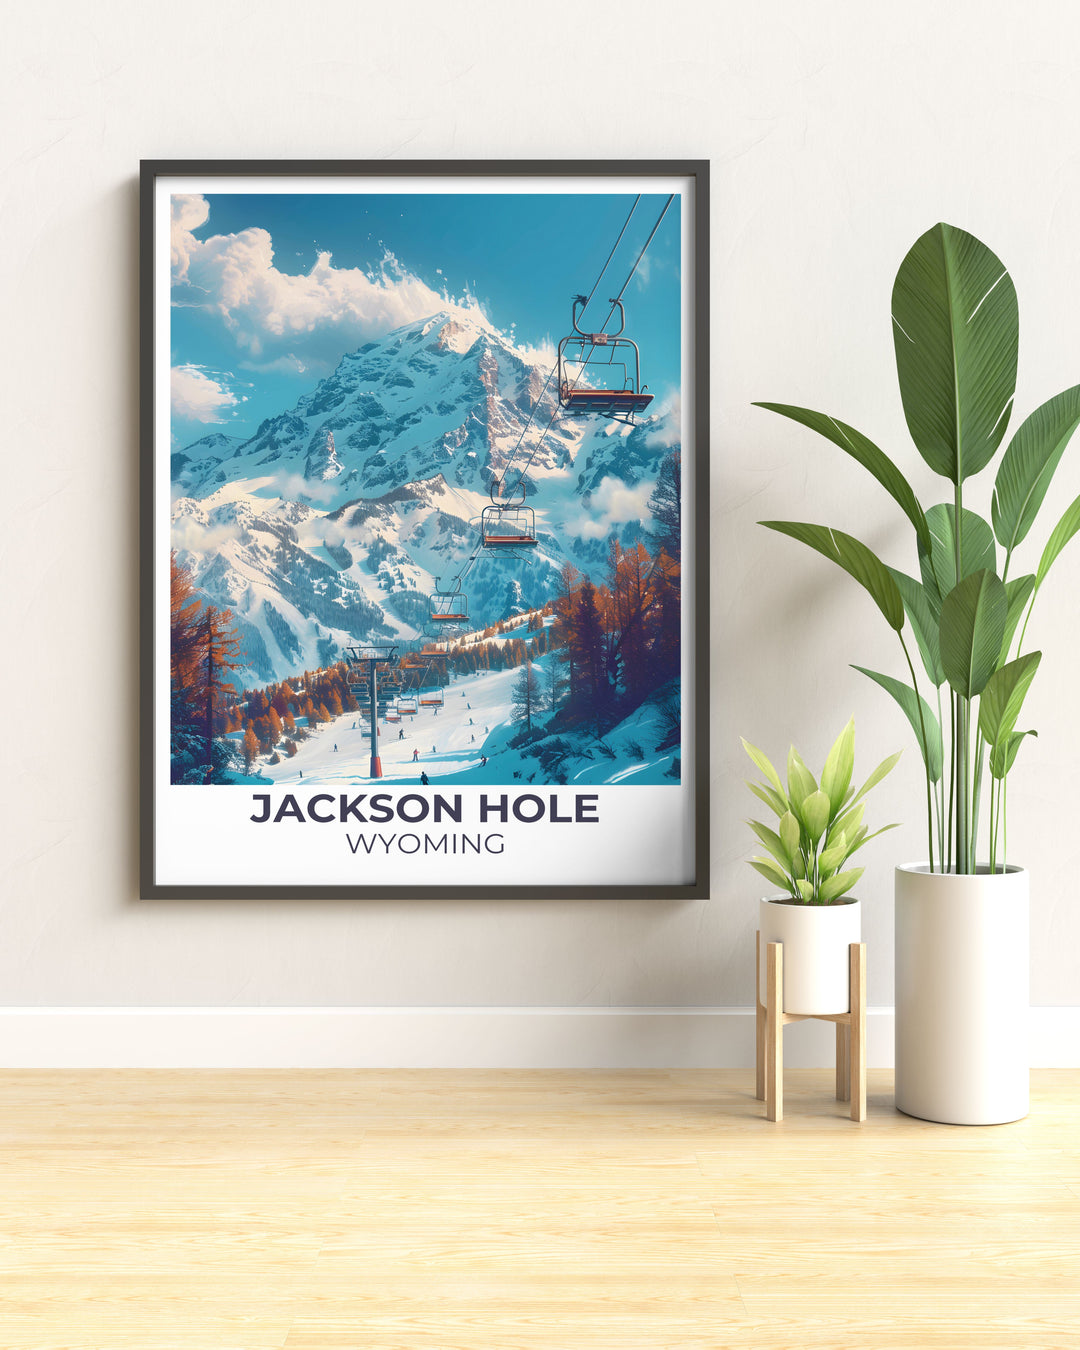 Custom print of Jackson Hole highlighting both summer and winter scenes tailored for personal home aesthetics